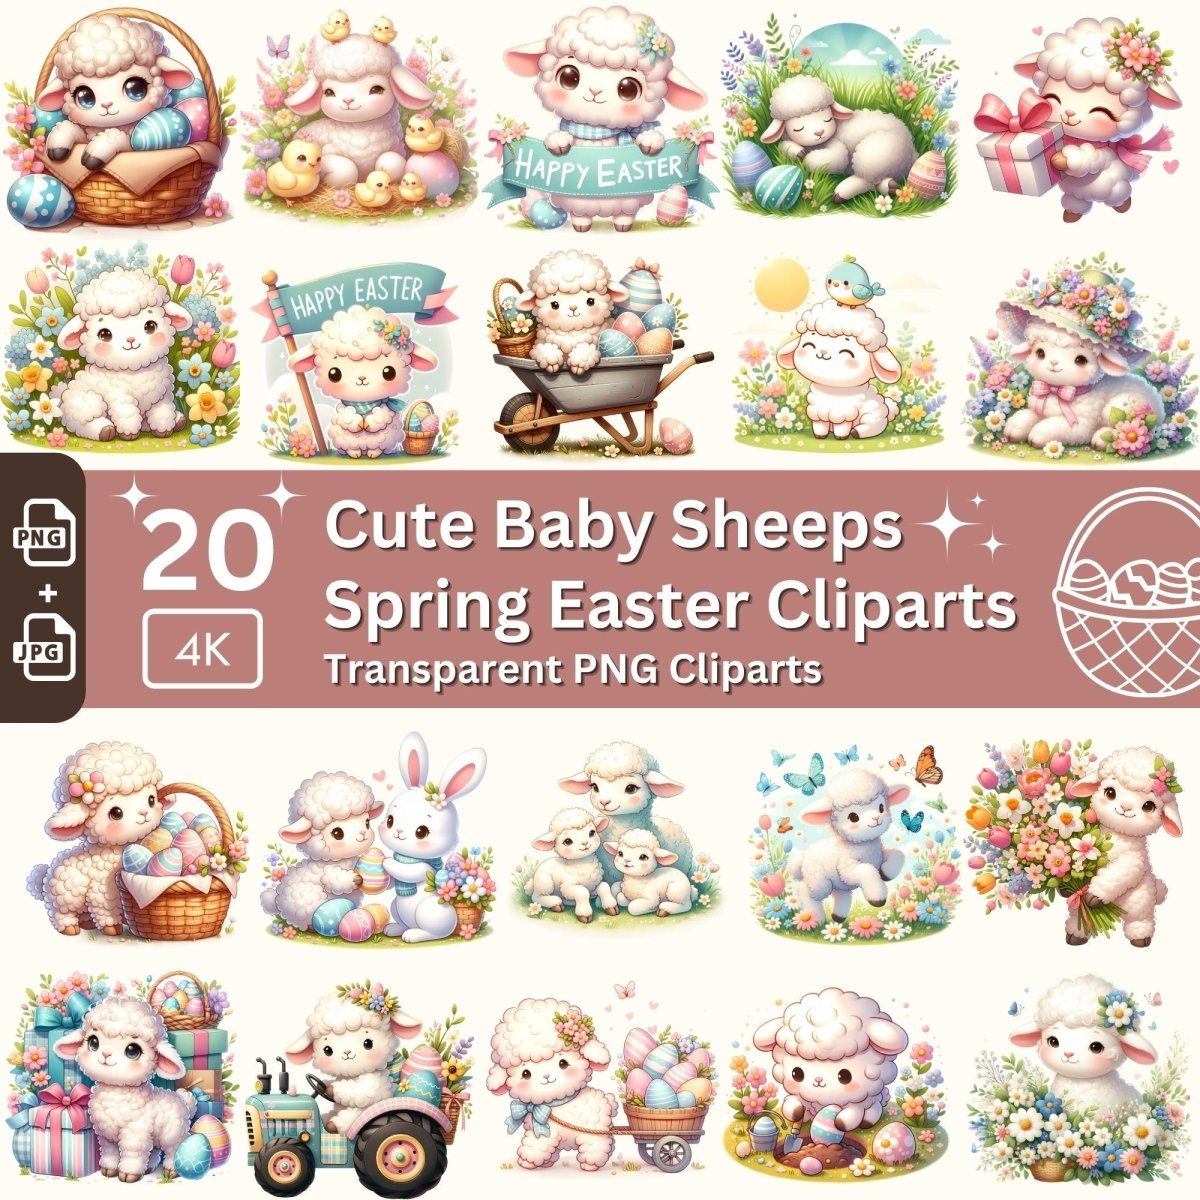 Cute Easter Lamb Cliparts 20 PNG Bundle Lovely Pastel Easter Baby Sheeps Card Crafting Junk Journal Kit Happy Easter Spring Graphic - Everything Pixel